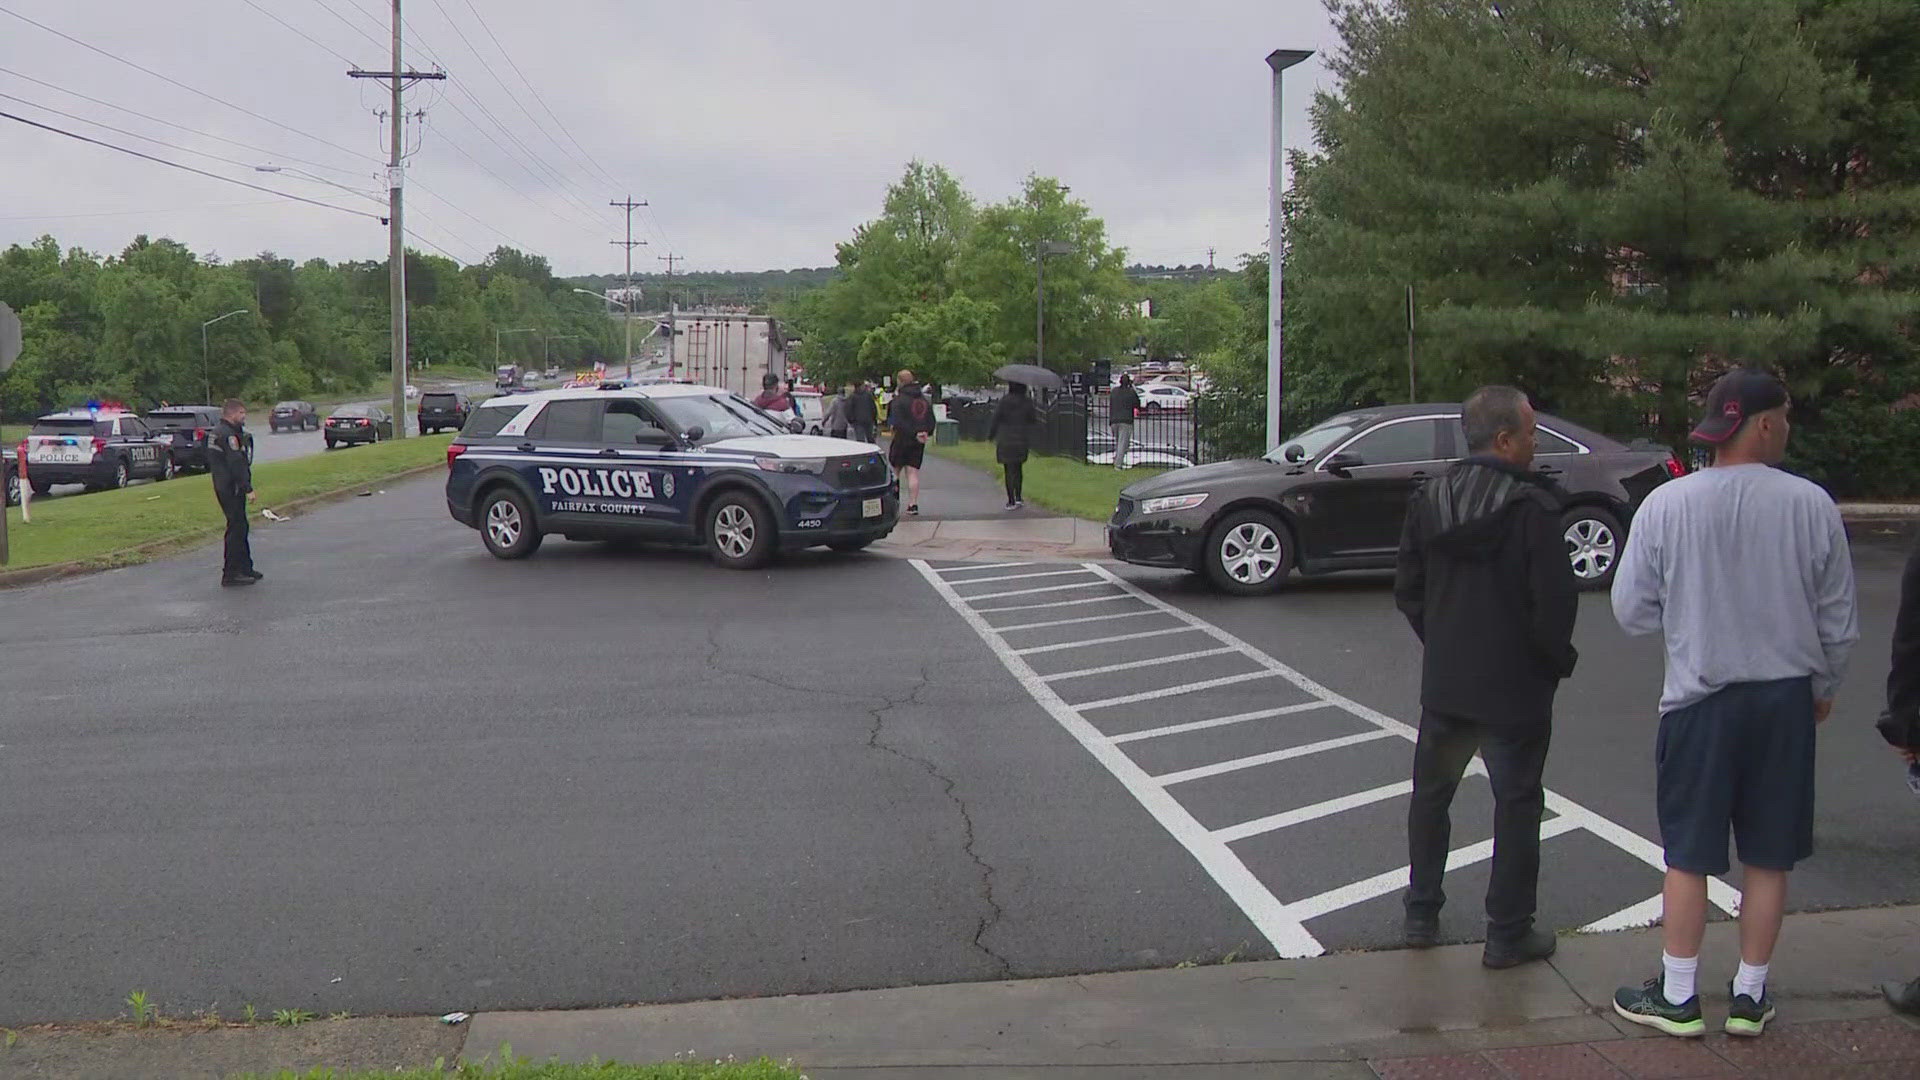 Police believe the shooting happened in the parking lot of a Dunkin' Donuts in Centreville